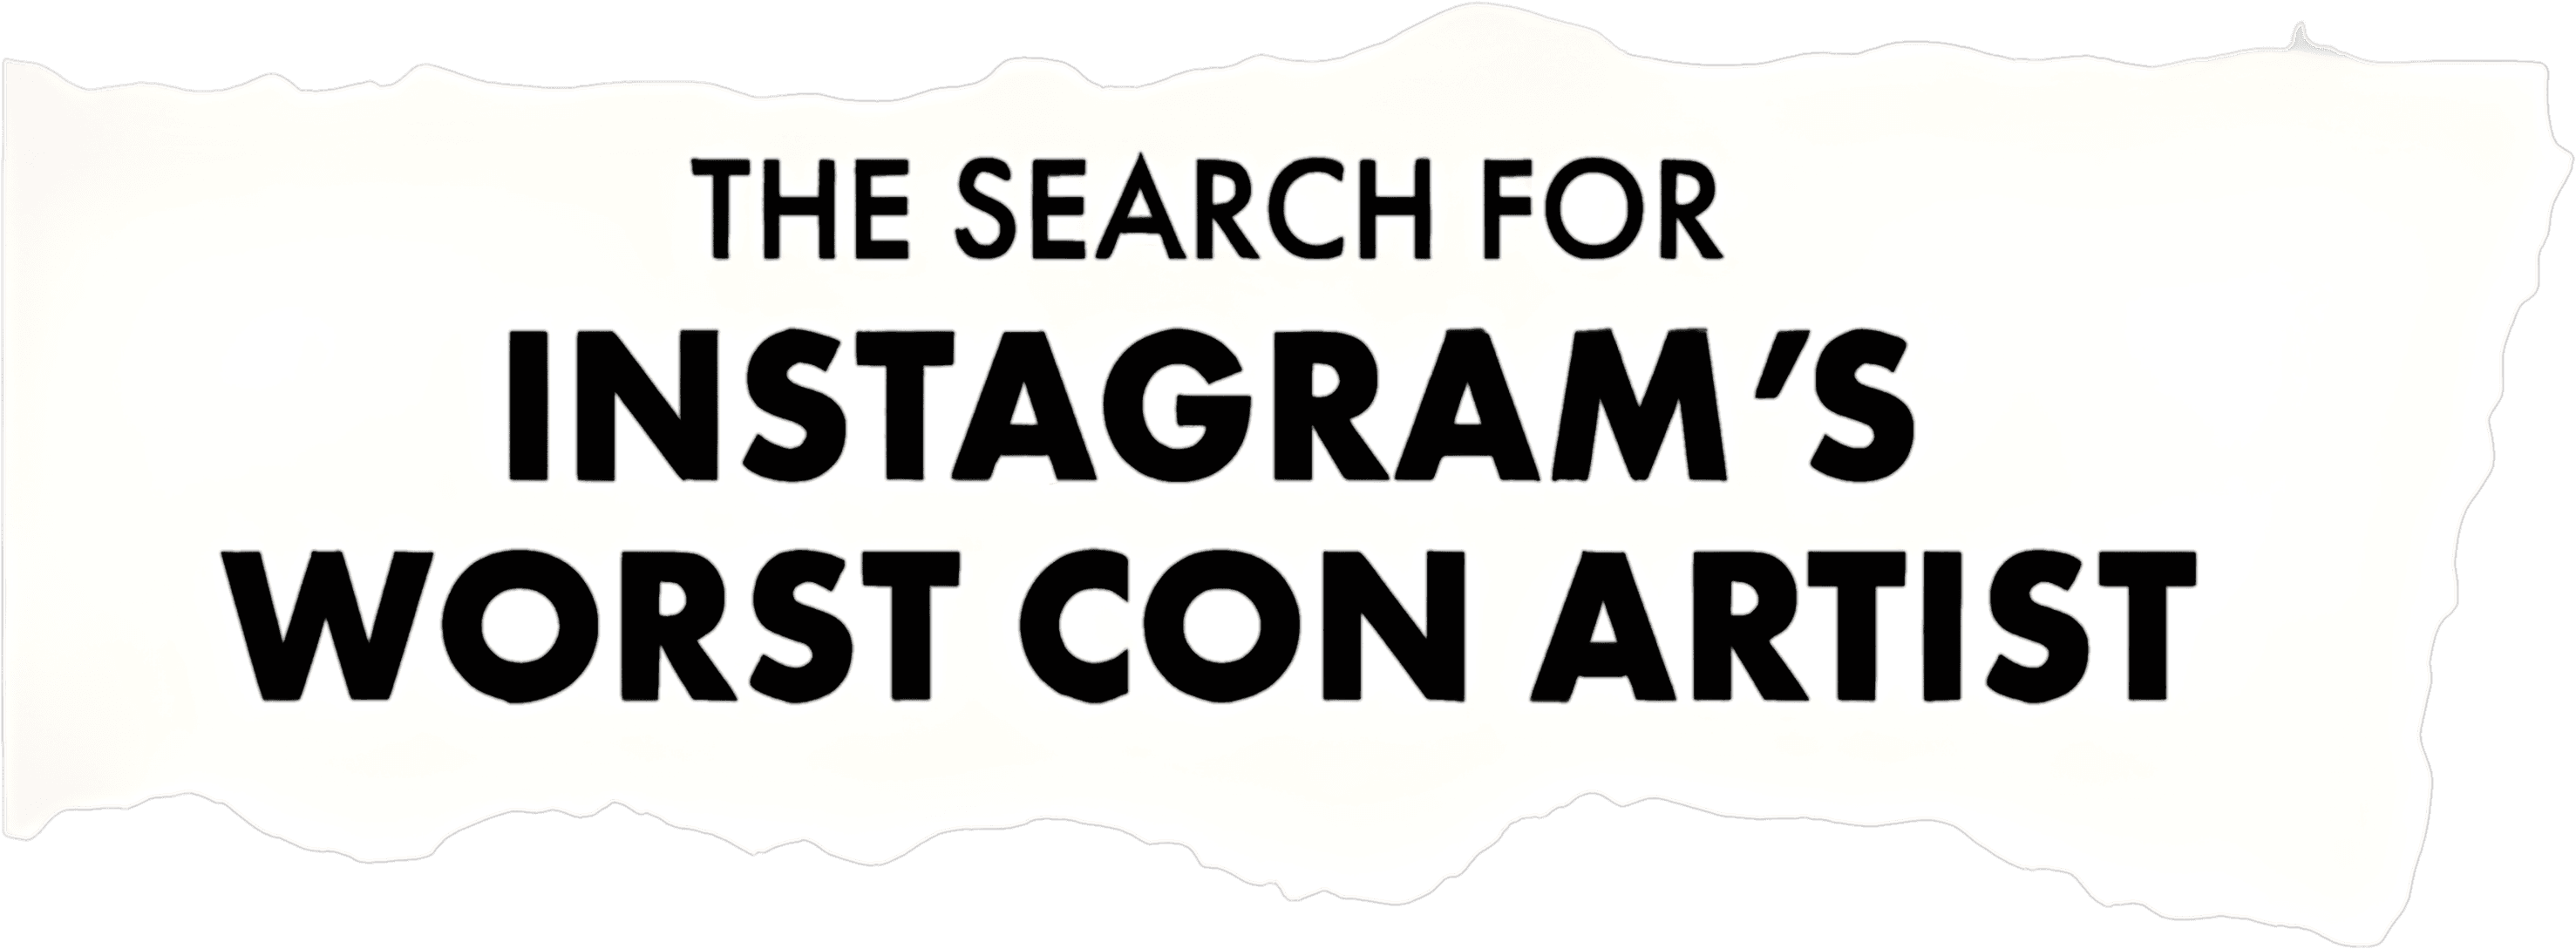 The Search For Instagram's Worst Con Artist logo